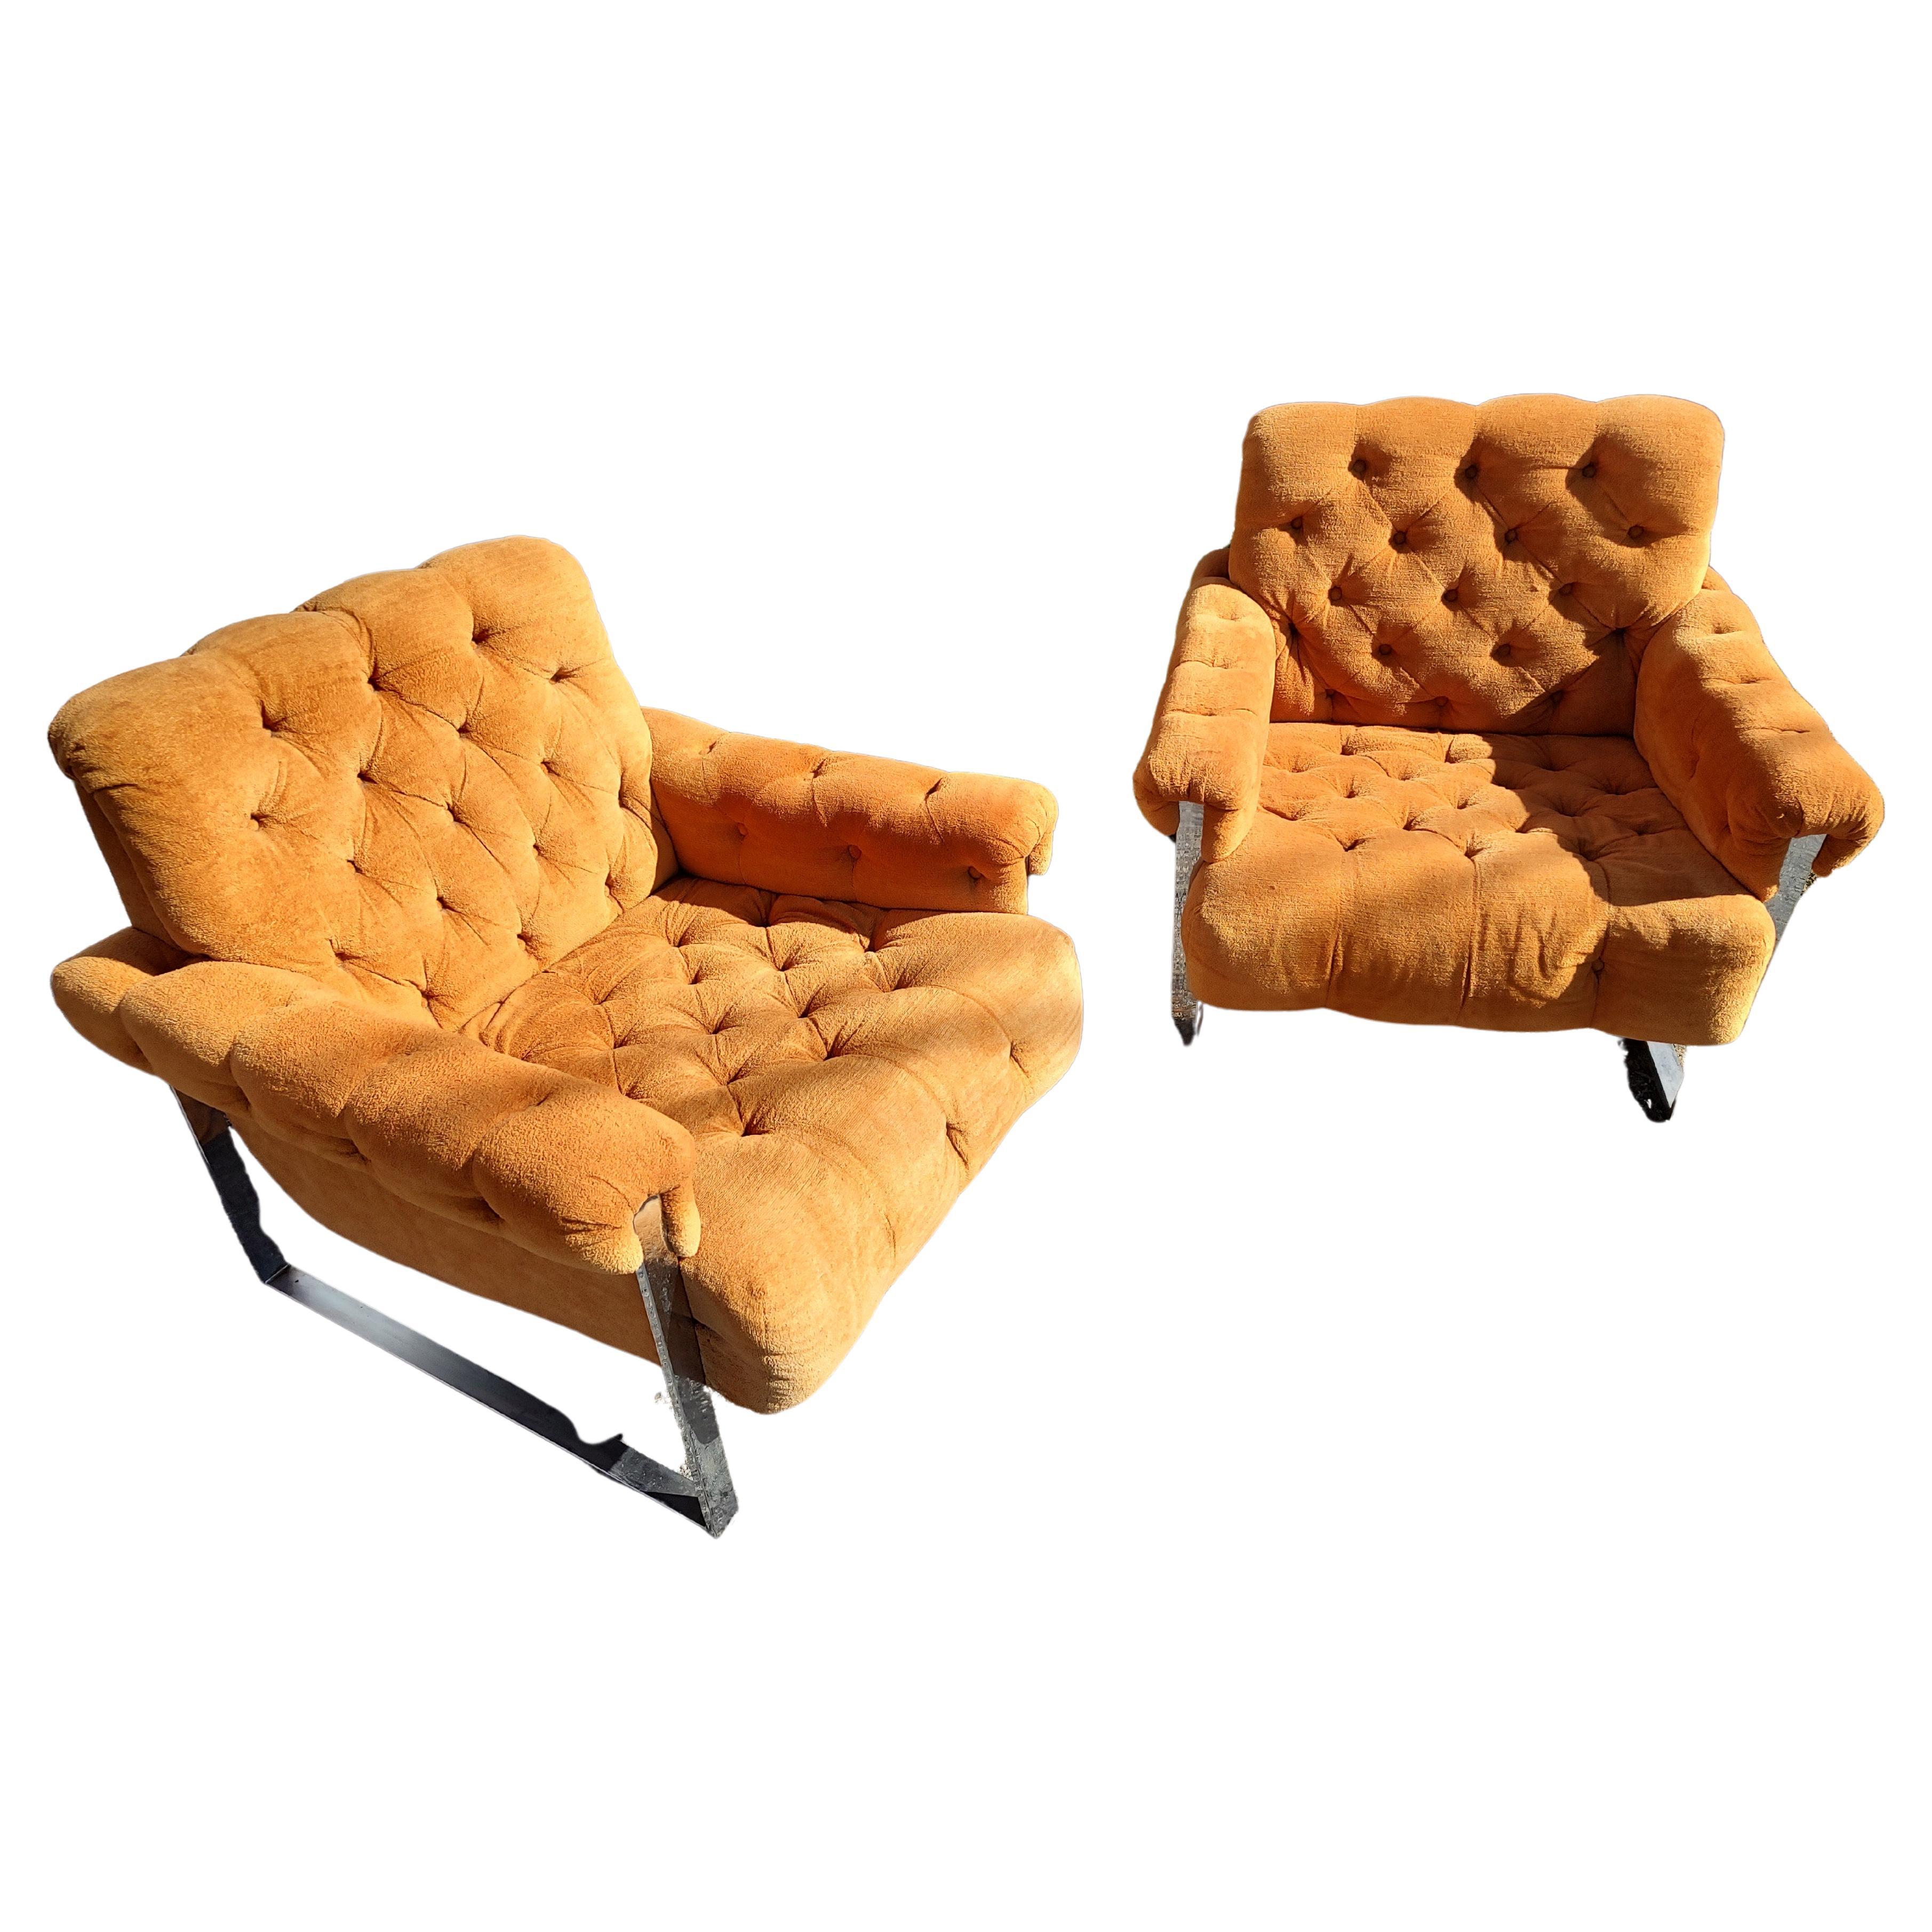 Hand-Crafted Pair of Button Tufted Lounge Chairs in Orange with Chrome Sled Bases For Sale